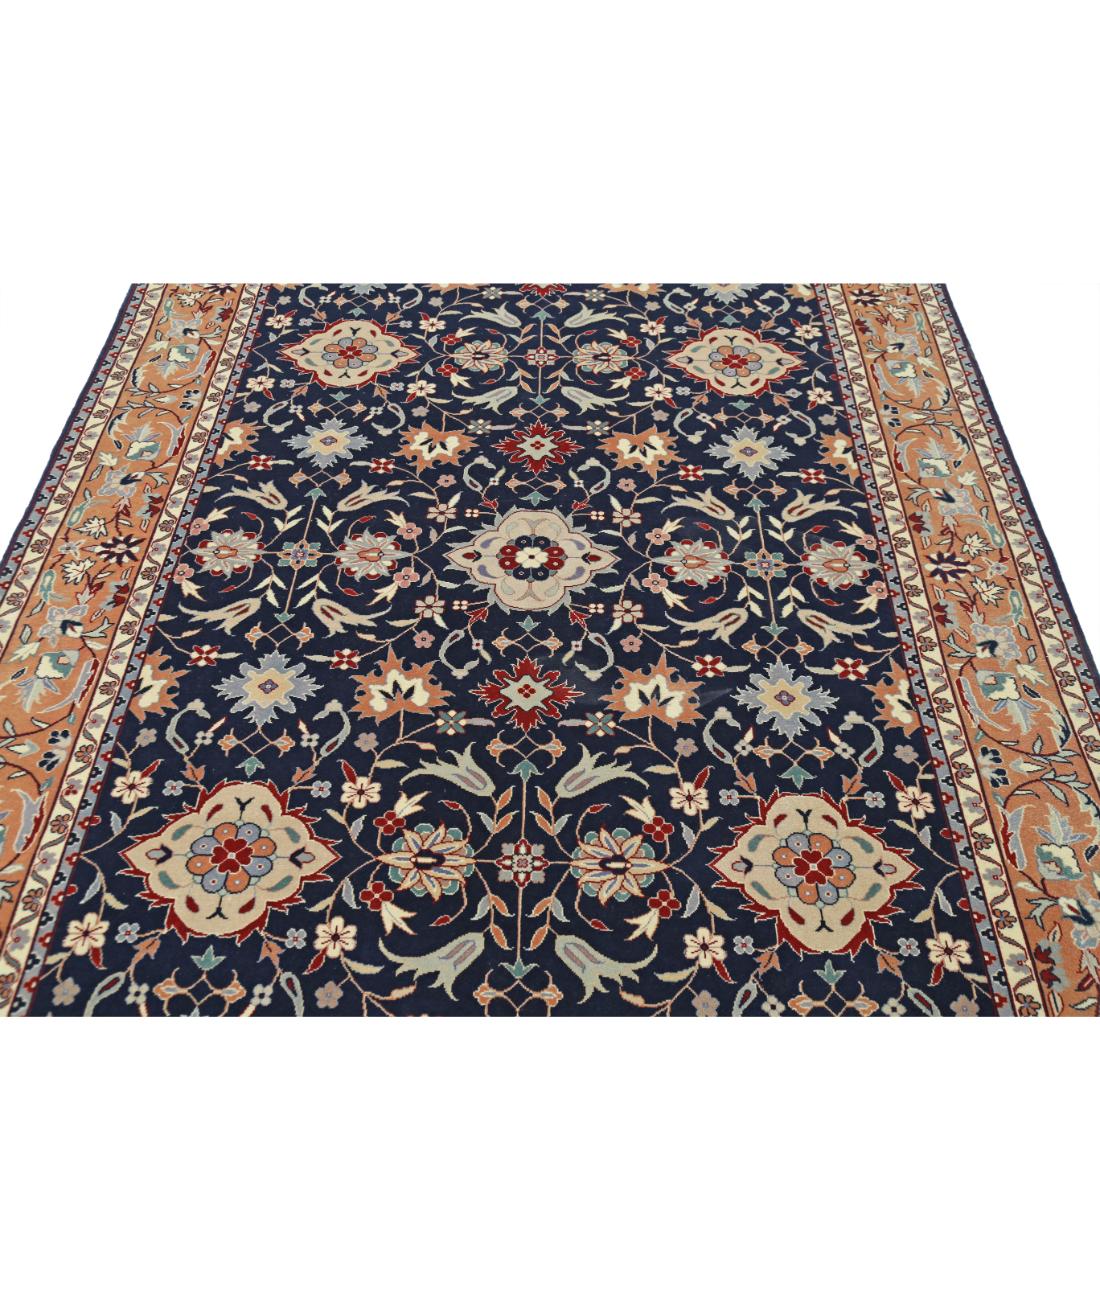 Hand Knotted Heritage Persian Style Wool Rug - 6'0'' x 9'0'' 6' 0" X 9' 0" (183 X 274) / Blue / Tan